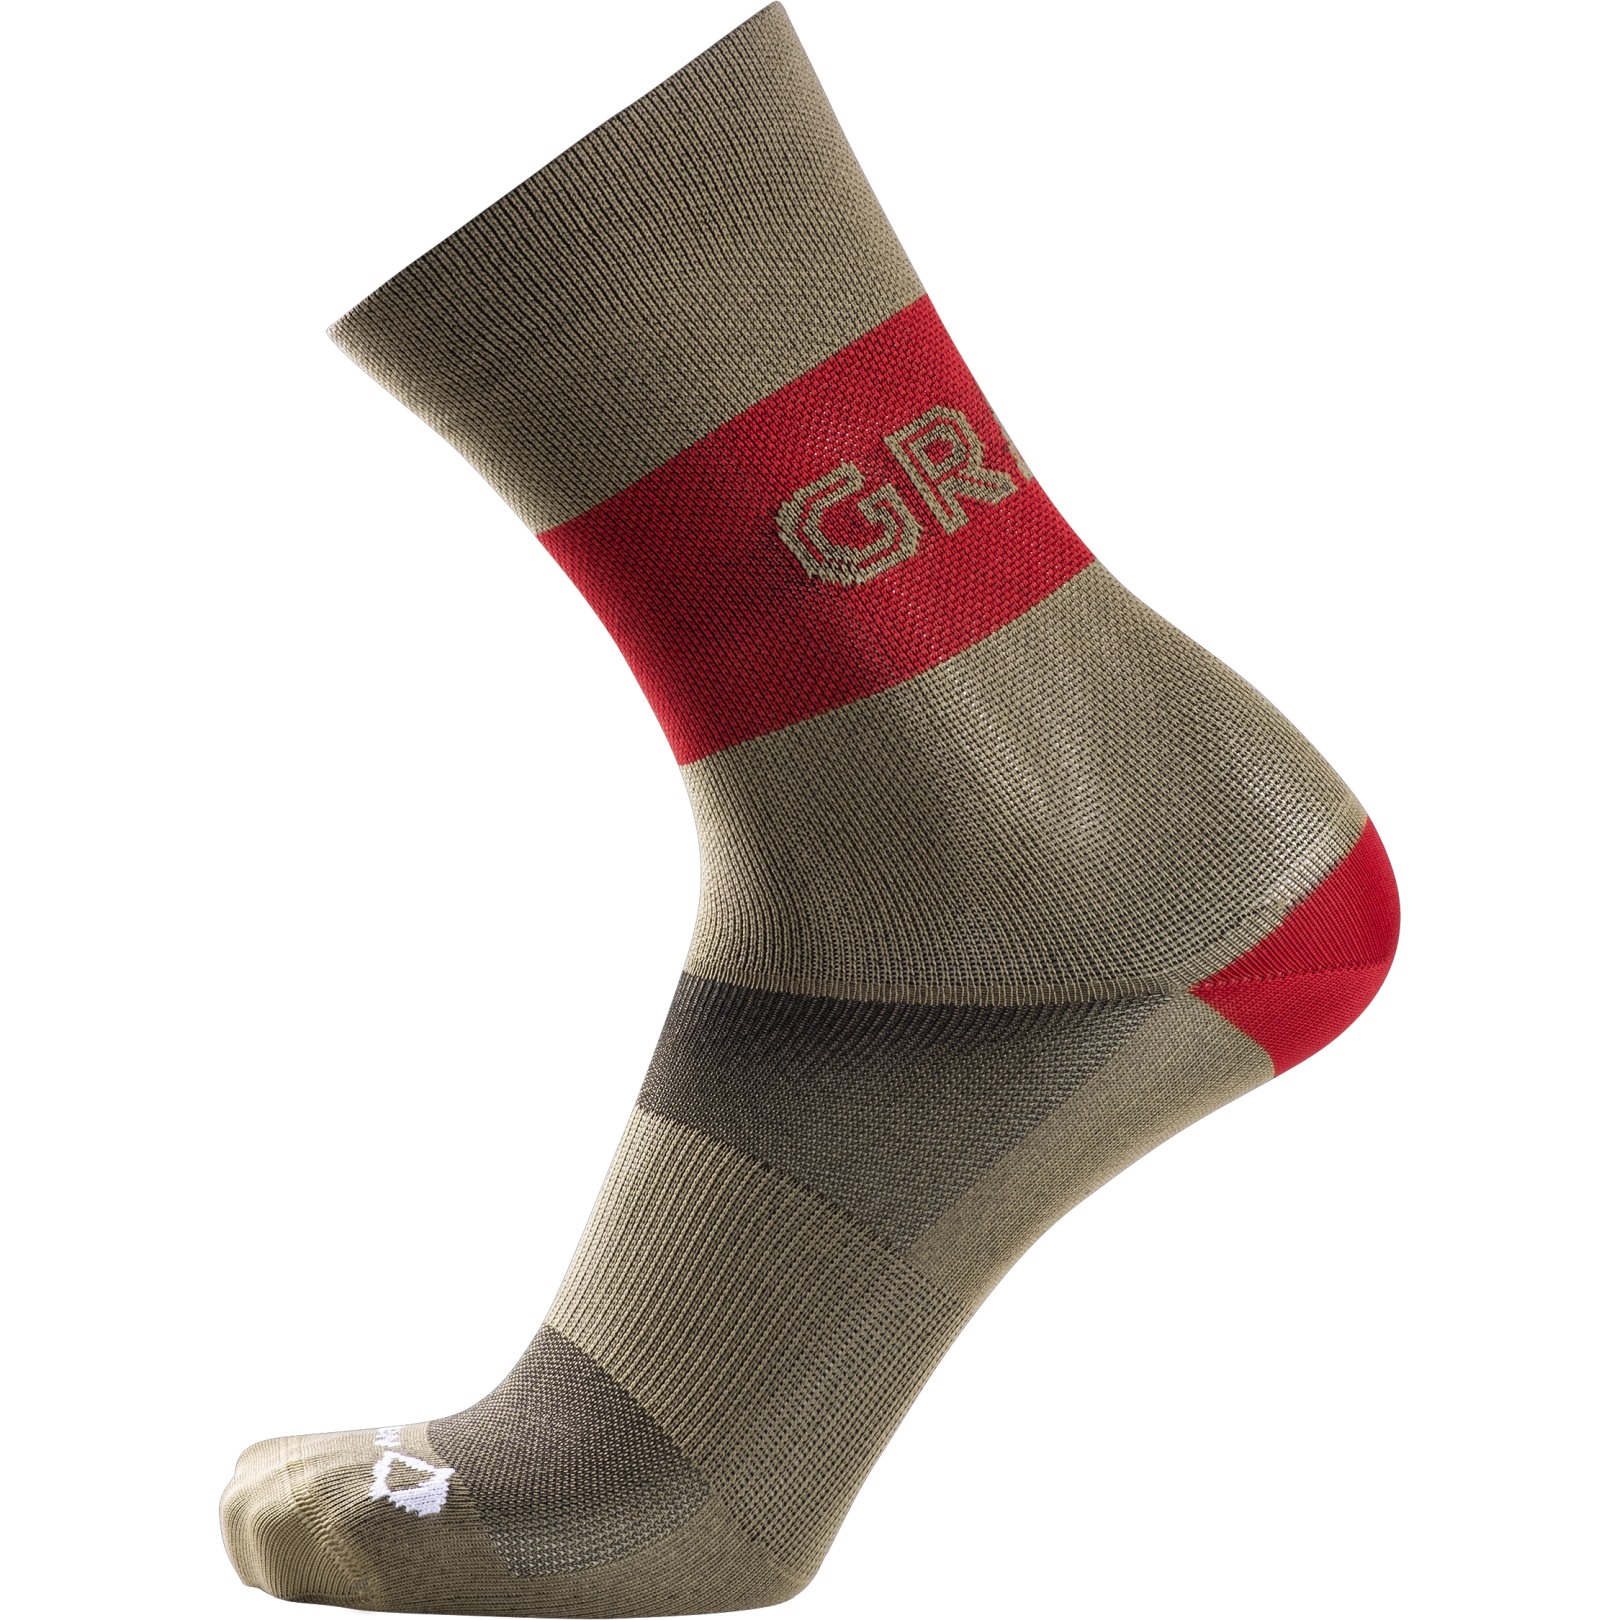 Picture of Nalini Gravel Socks - green/red 4100